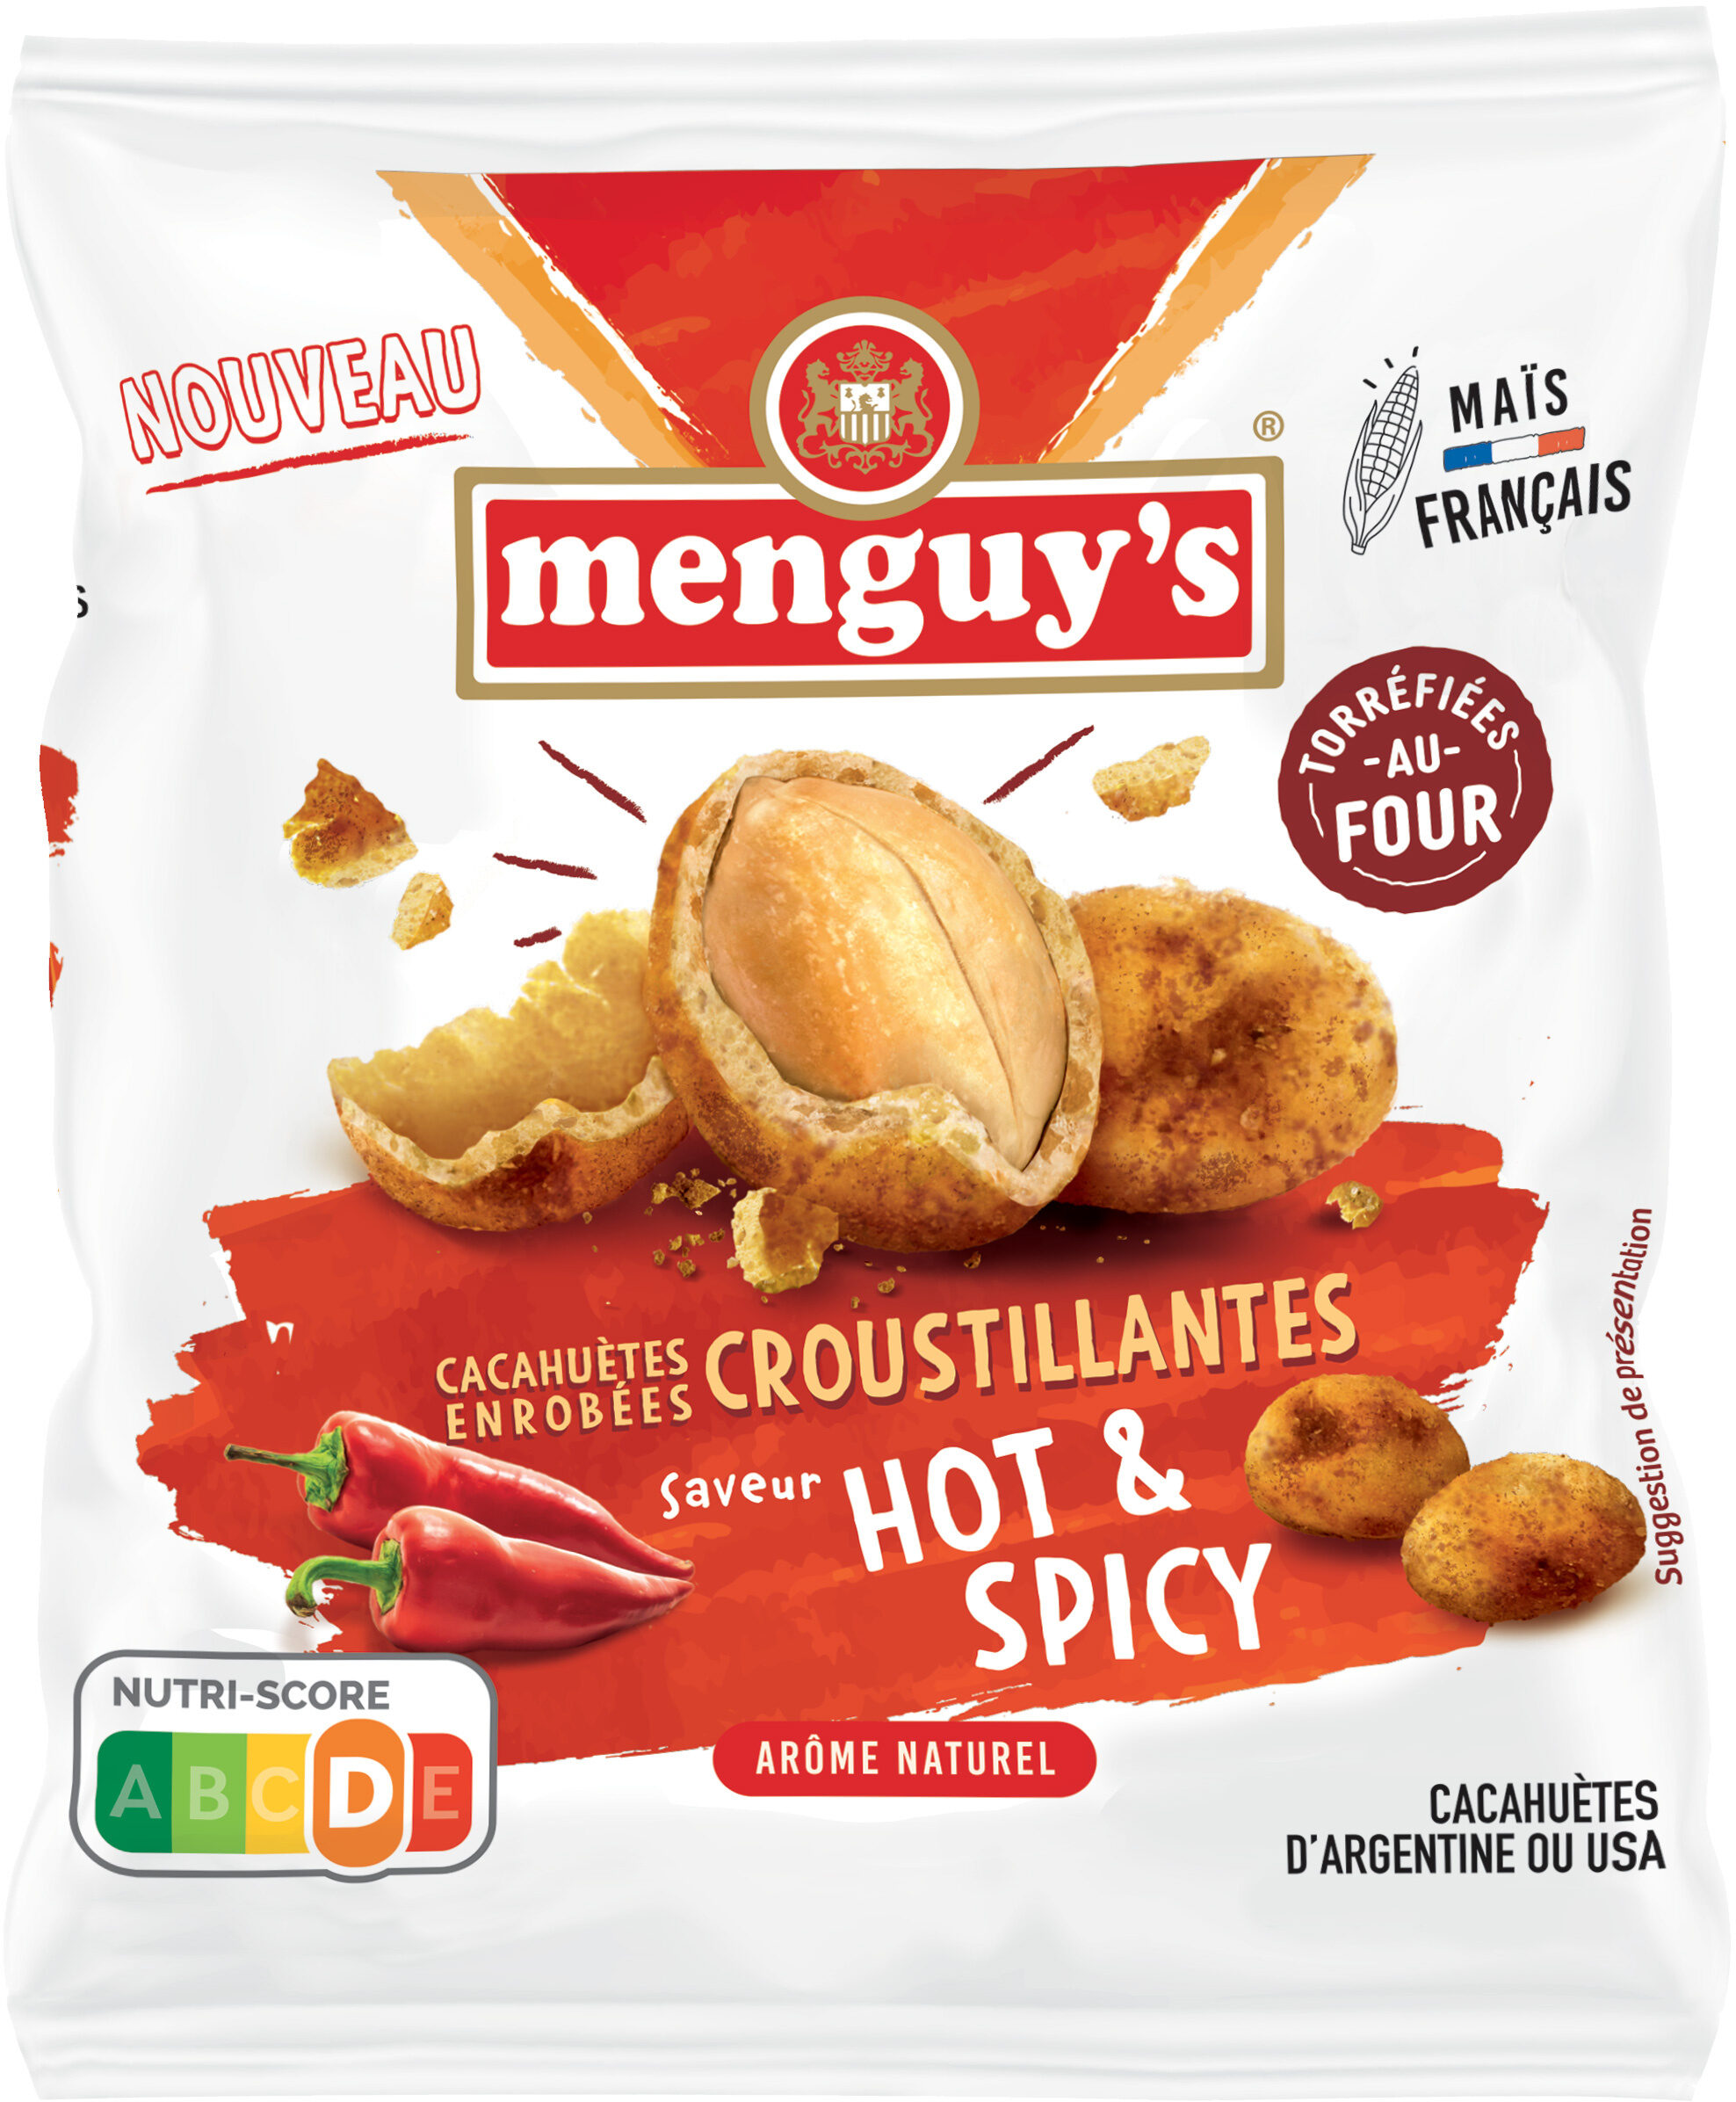 Menguy's cacahuetes enrobees hot & spicy 170 g - Product - fr